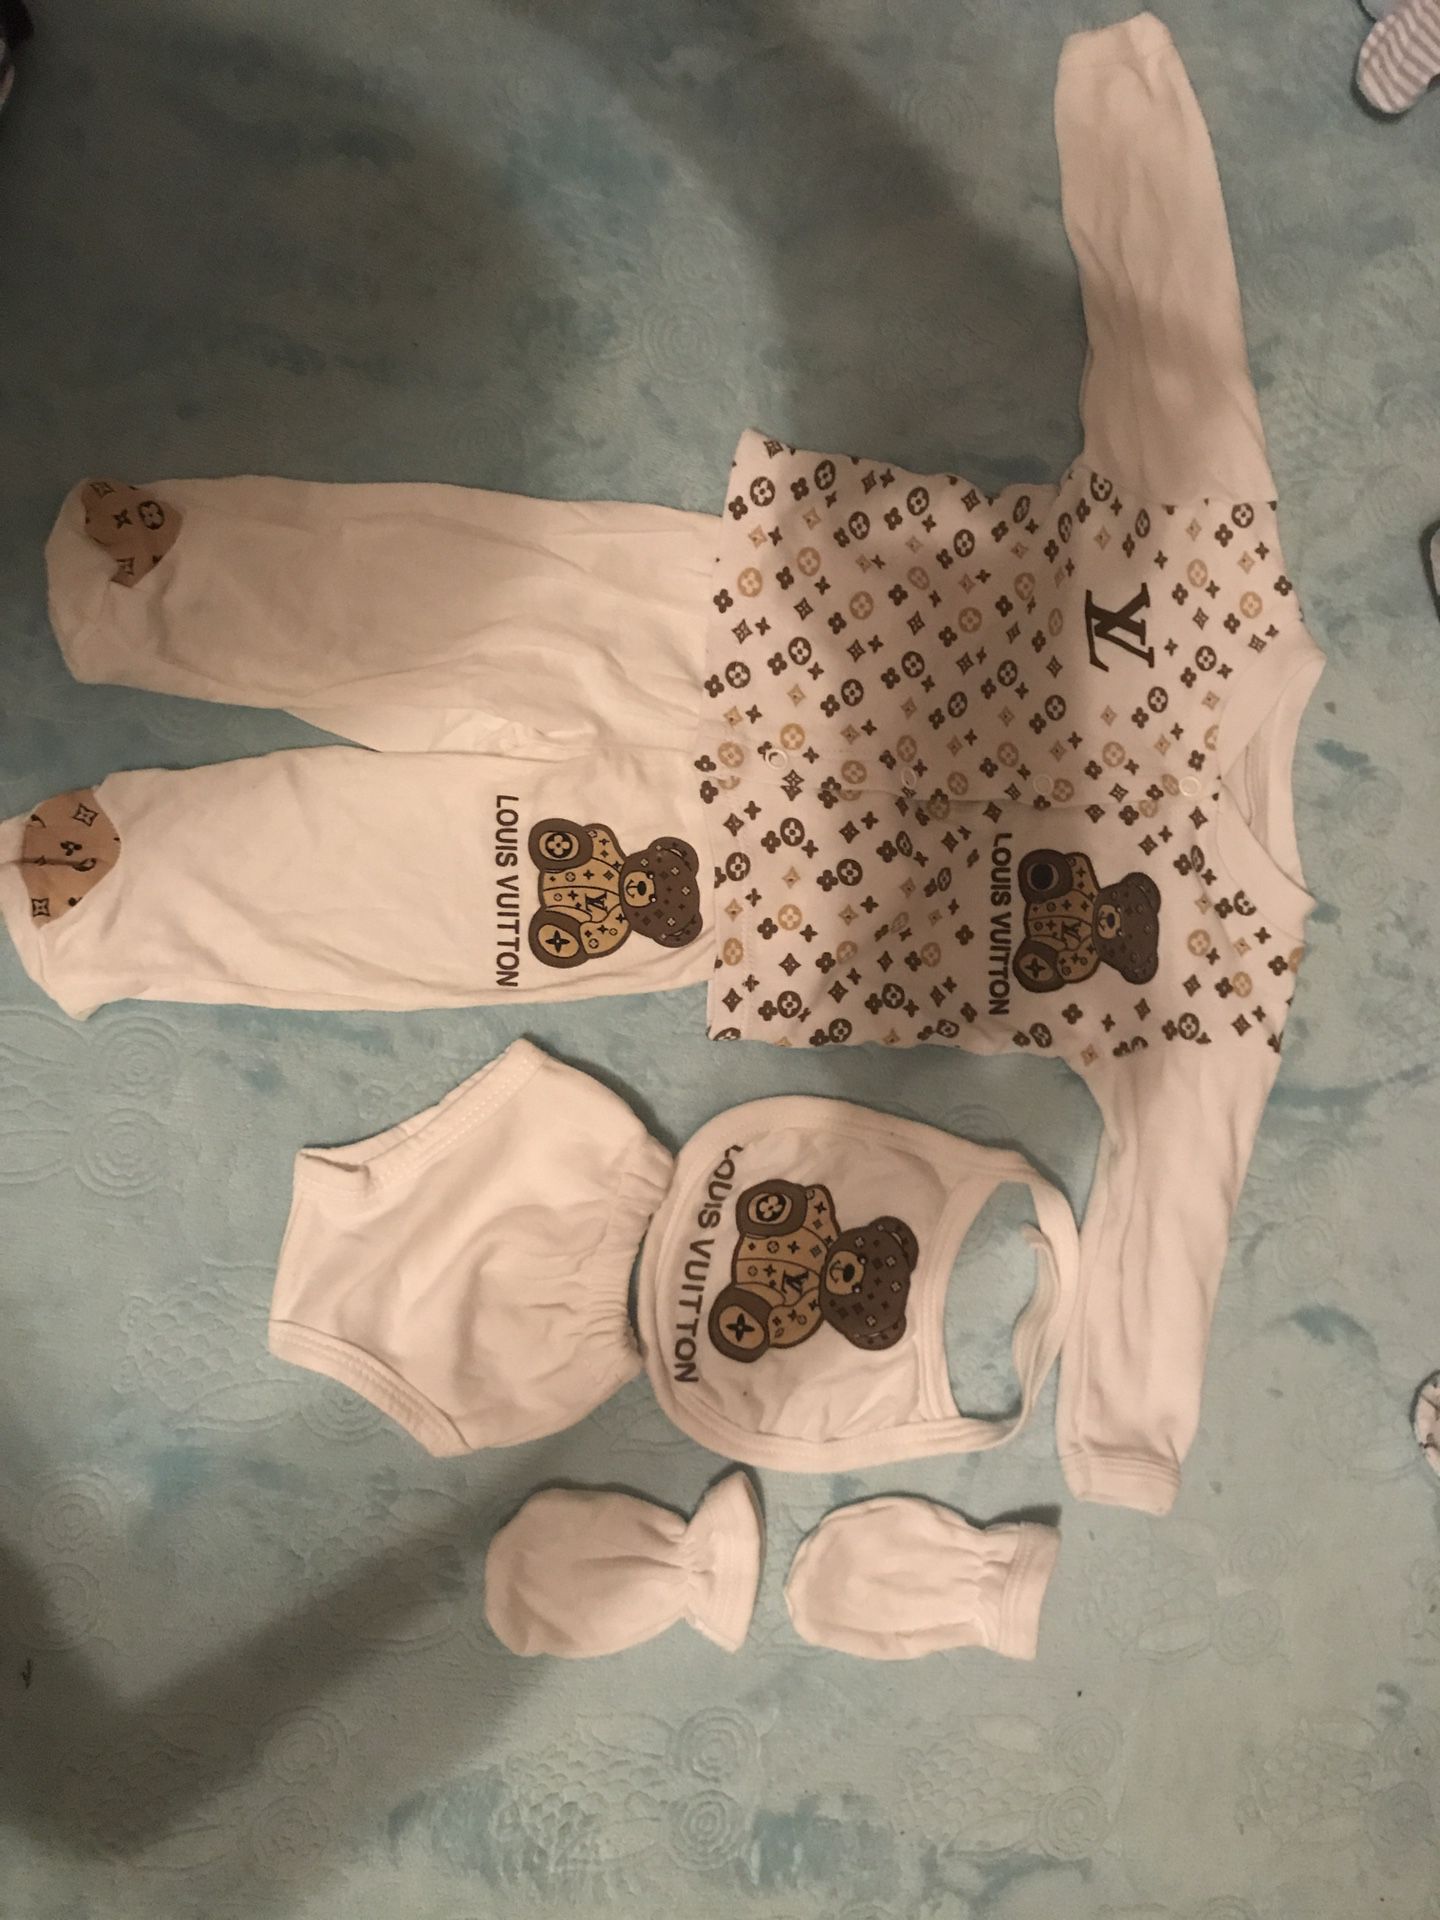 Louis Vuitton newborn outfit for Sale in Castro Valley, CA - OfferUp